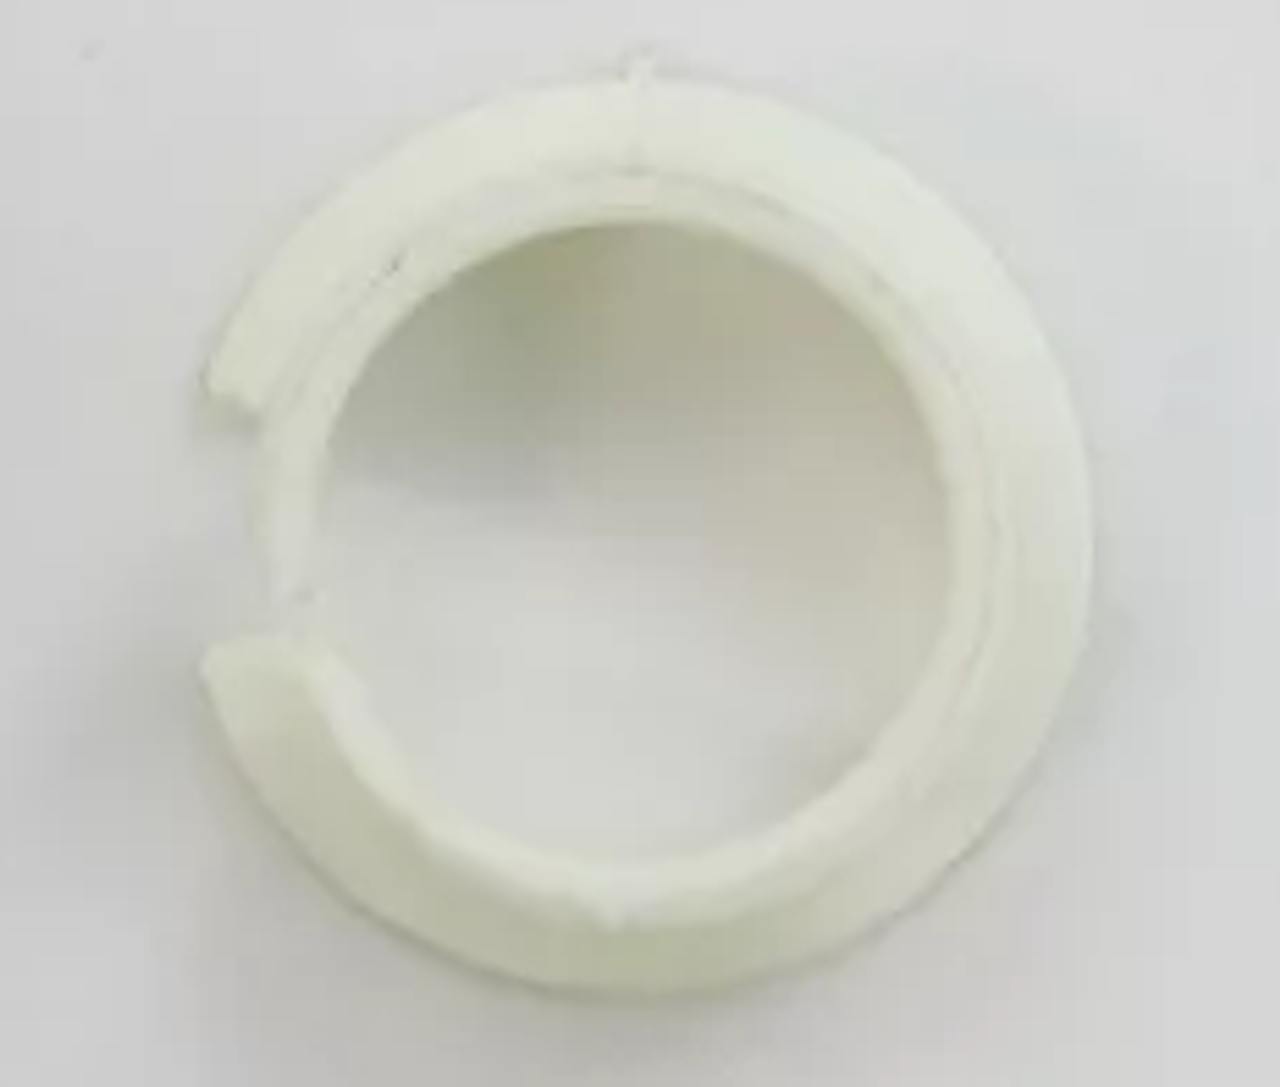 Simplicity 1667588SM Bushing, Nylon, 3/8 ID x 7/16 OD x 2"
This part is compatible with the following machines:

Simplicity I1224E (1695659) - Simplicity 24" 11TP Snowthrower - Chute & Rotation Group - Left Side Crank (2988678_2988679)
Simplicity I1224E (1695821) - Simplicity 24" 11.5TP Dual Stage Snowthrower - Handles & Controls Group (2988674_2989416)
Simplicity I1224E (1695985) - Simplicity 24" 11.5TP Dual Stage Snowthrower - Handles & Controls Group (2988674_2989416)